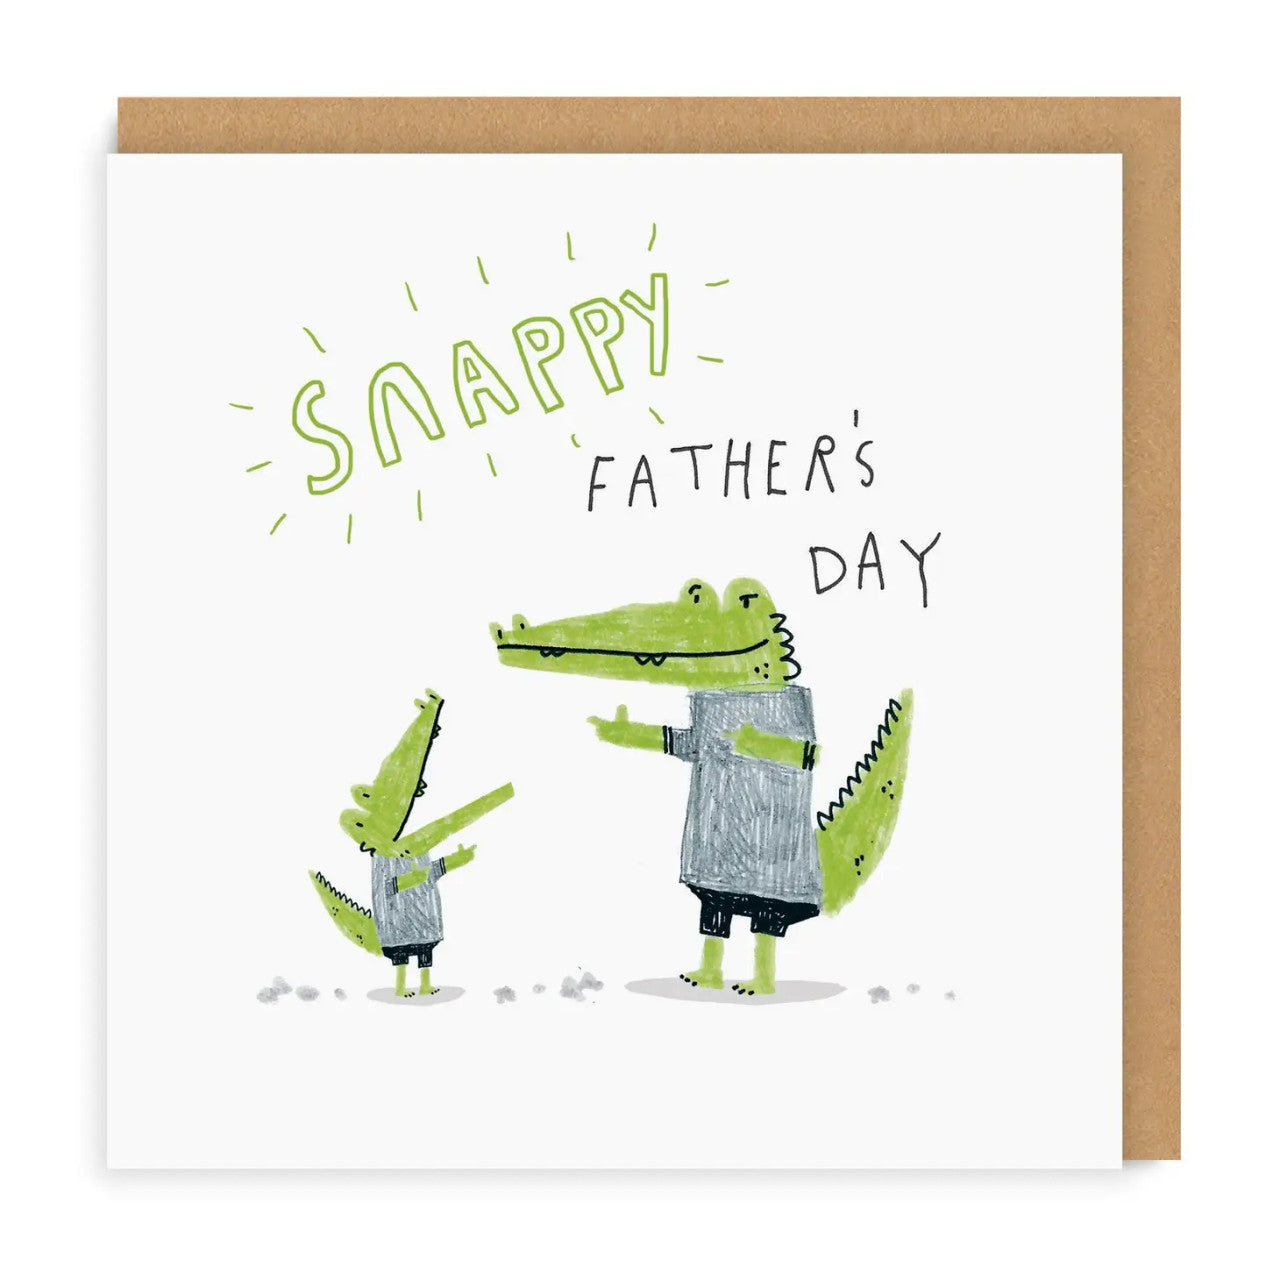 Father's Day Card text reads "Snappy Father's Day"